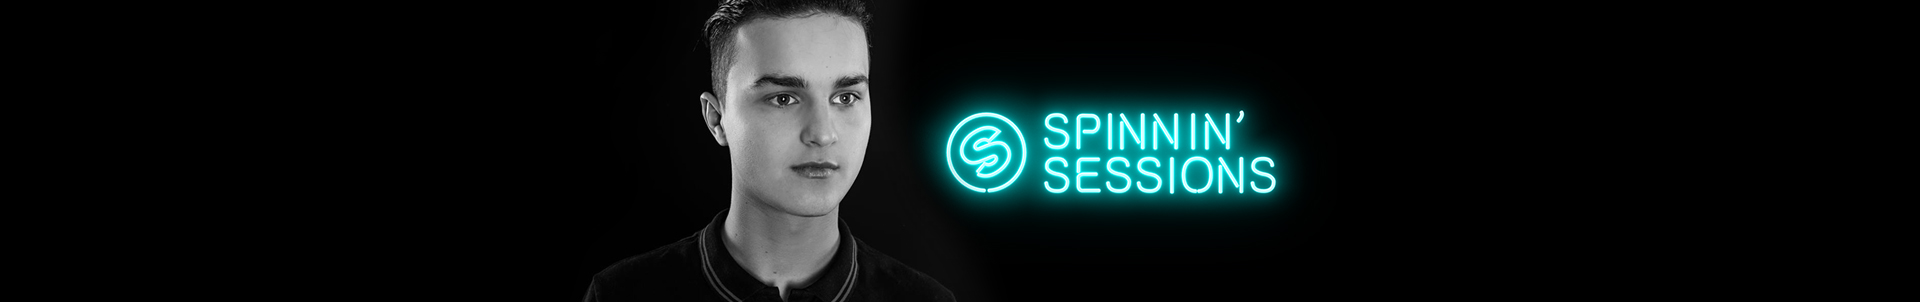 We Rave You premiere: Spinnin' Sessions with a Guest Mix by Trobi